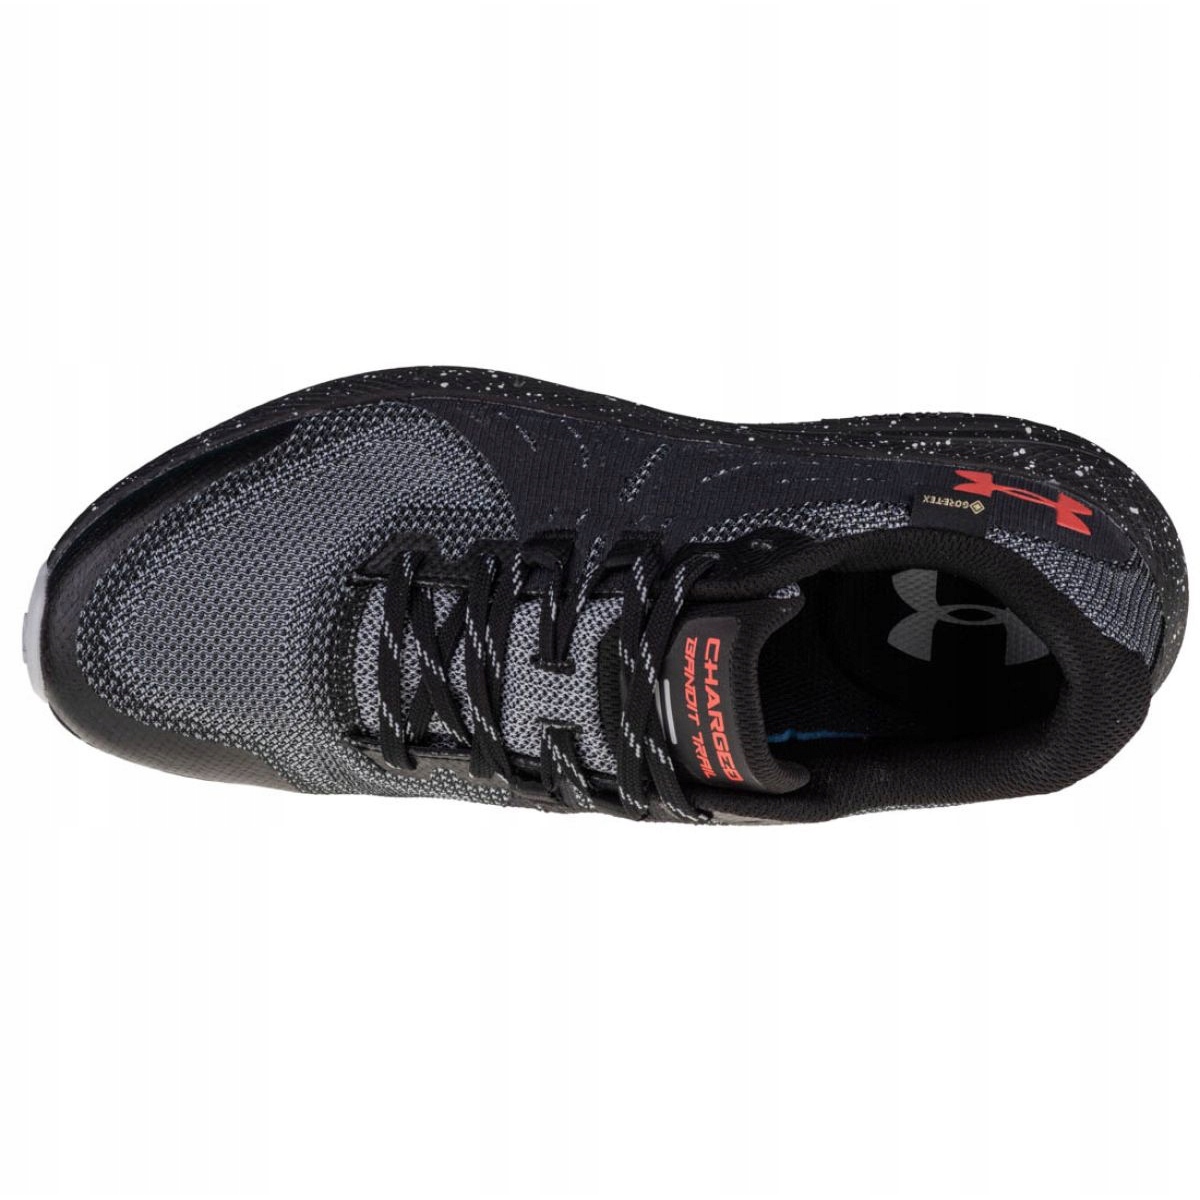 Under Armour Charged Bandit Trail Gore-Tex Running Shoes - 3022784